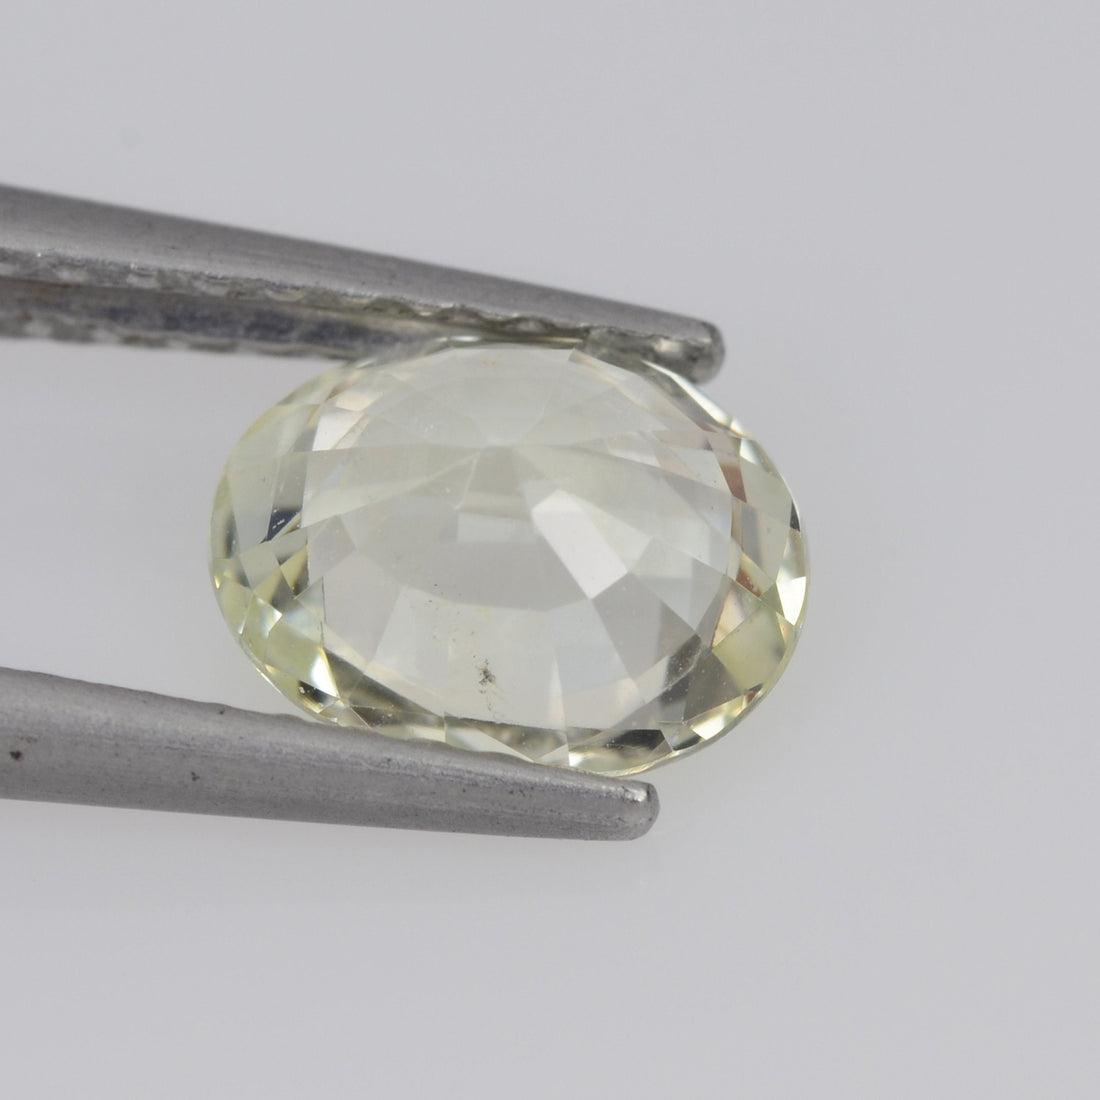 1.08 cts Natural Yellow Sapphire Loose Gemstone Oval Cut